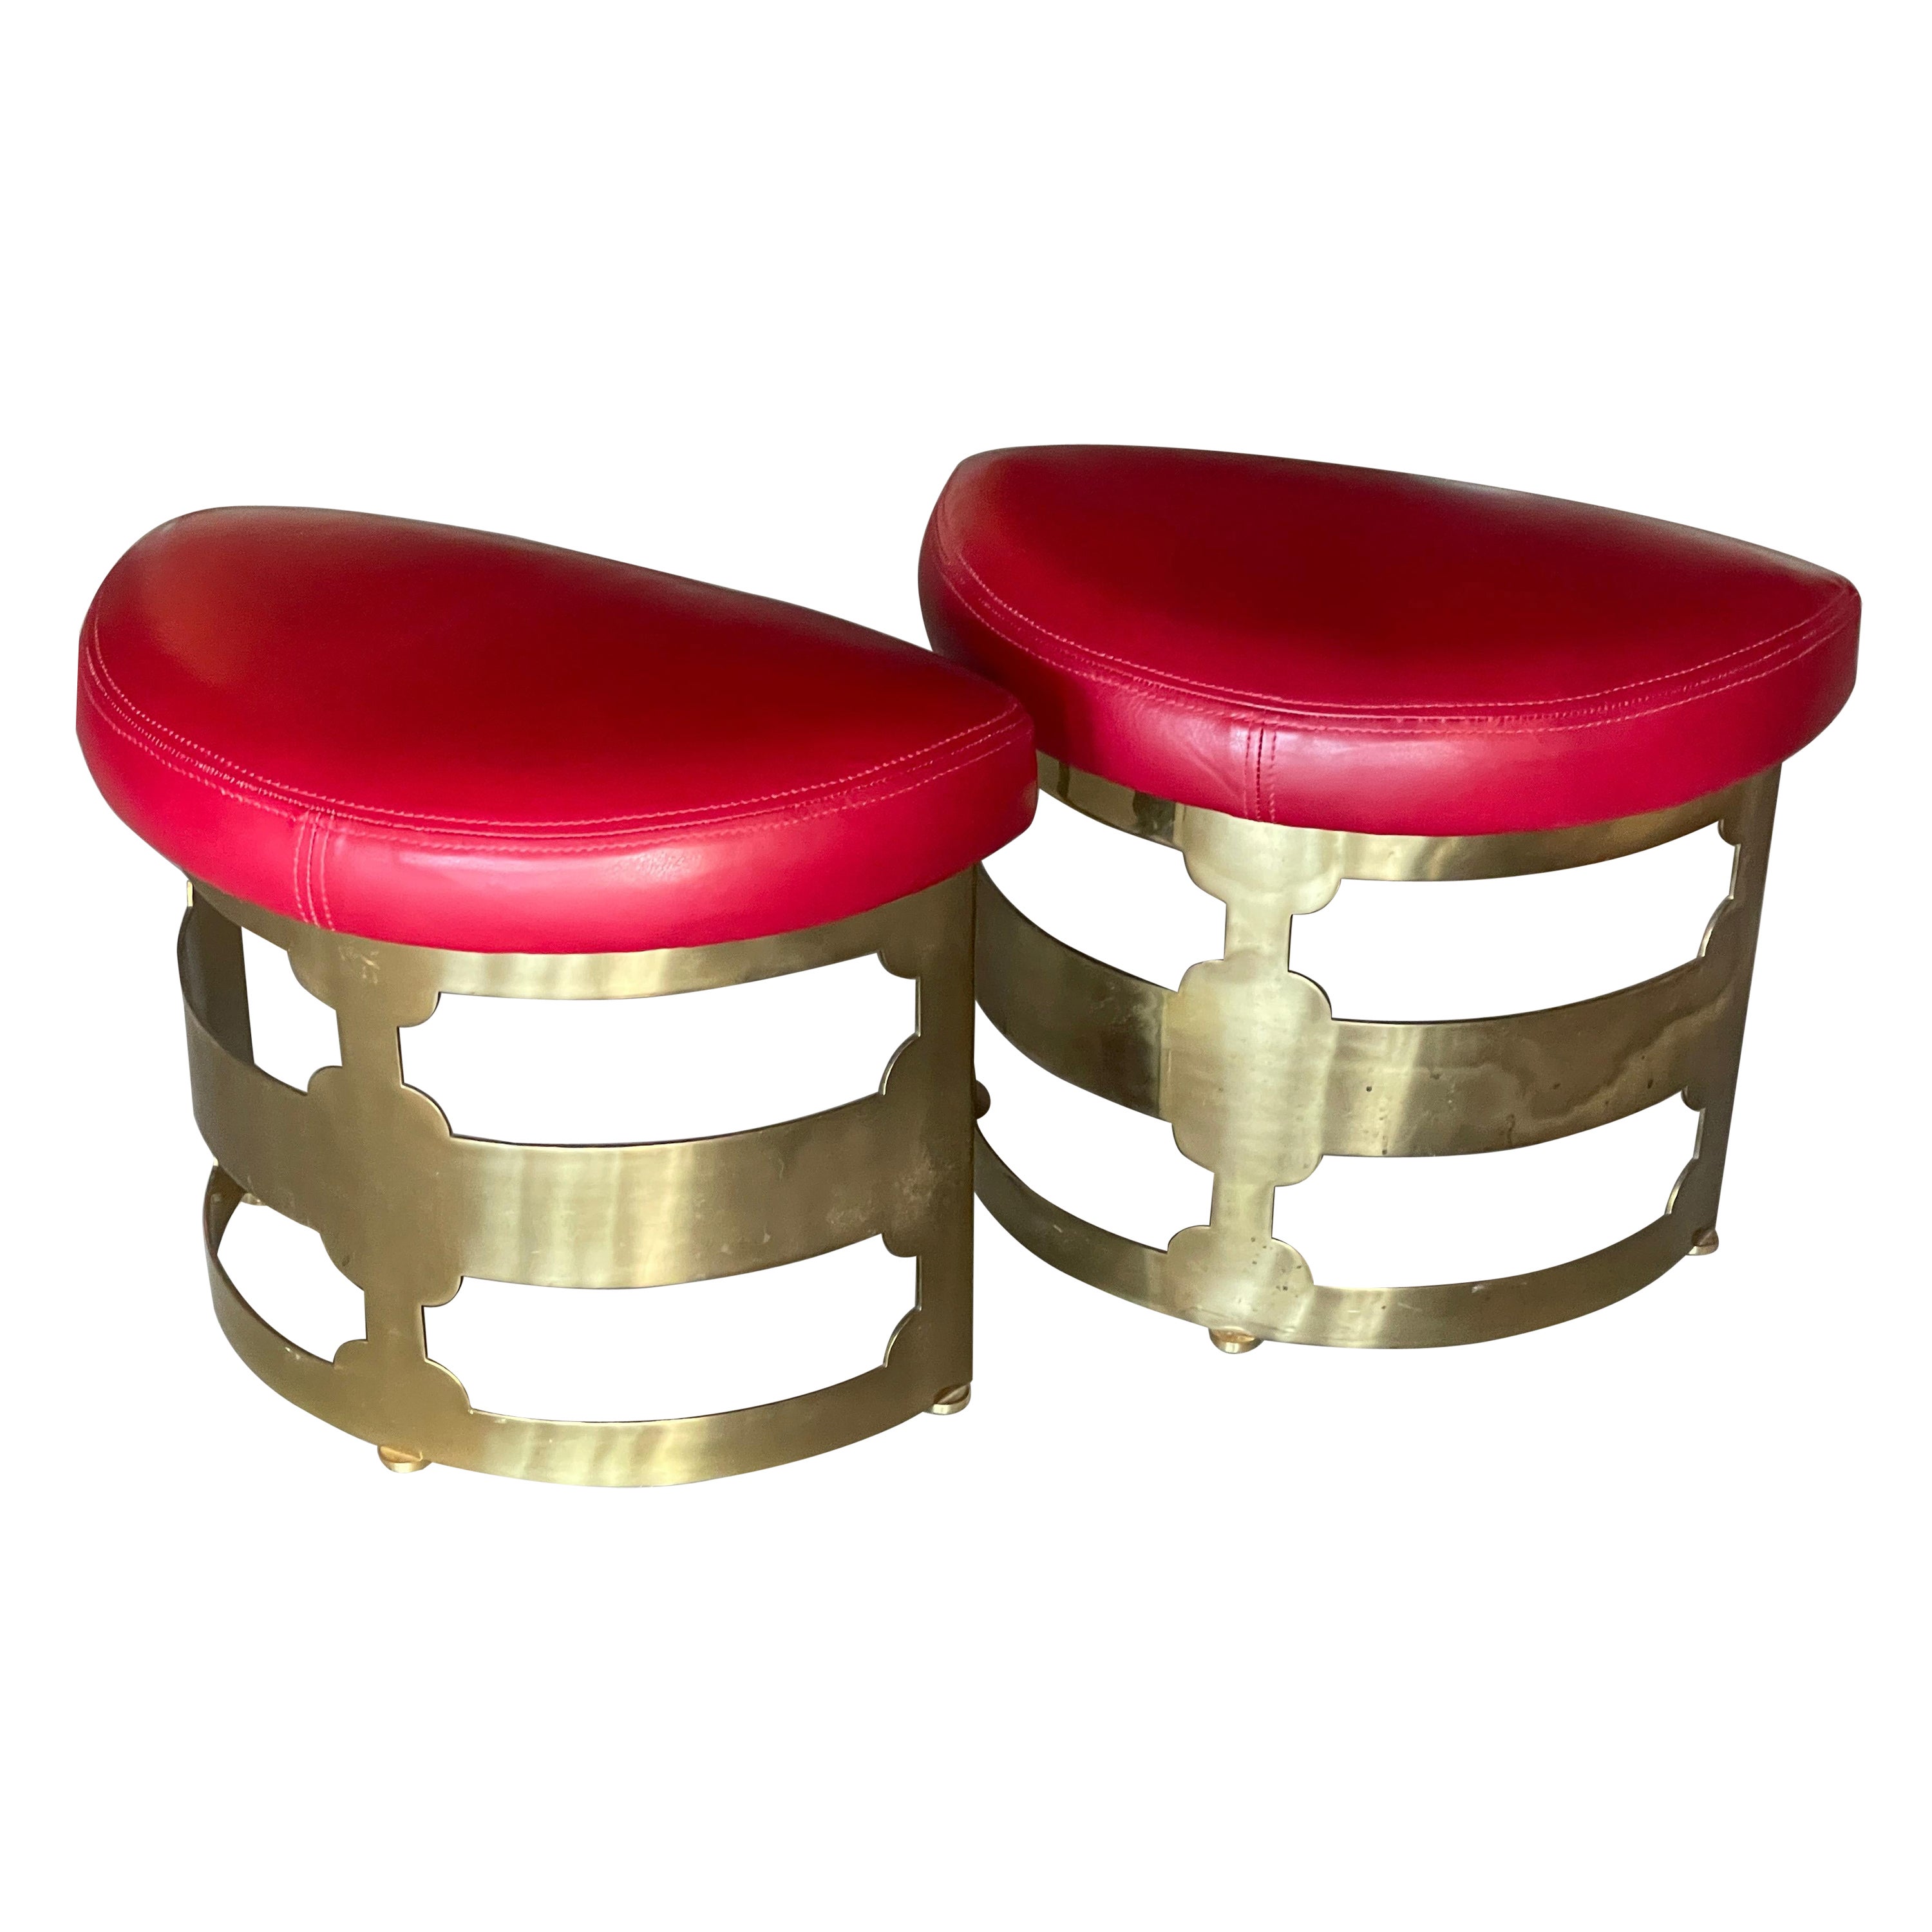 Brass and Red Leather Footstool Ottomans